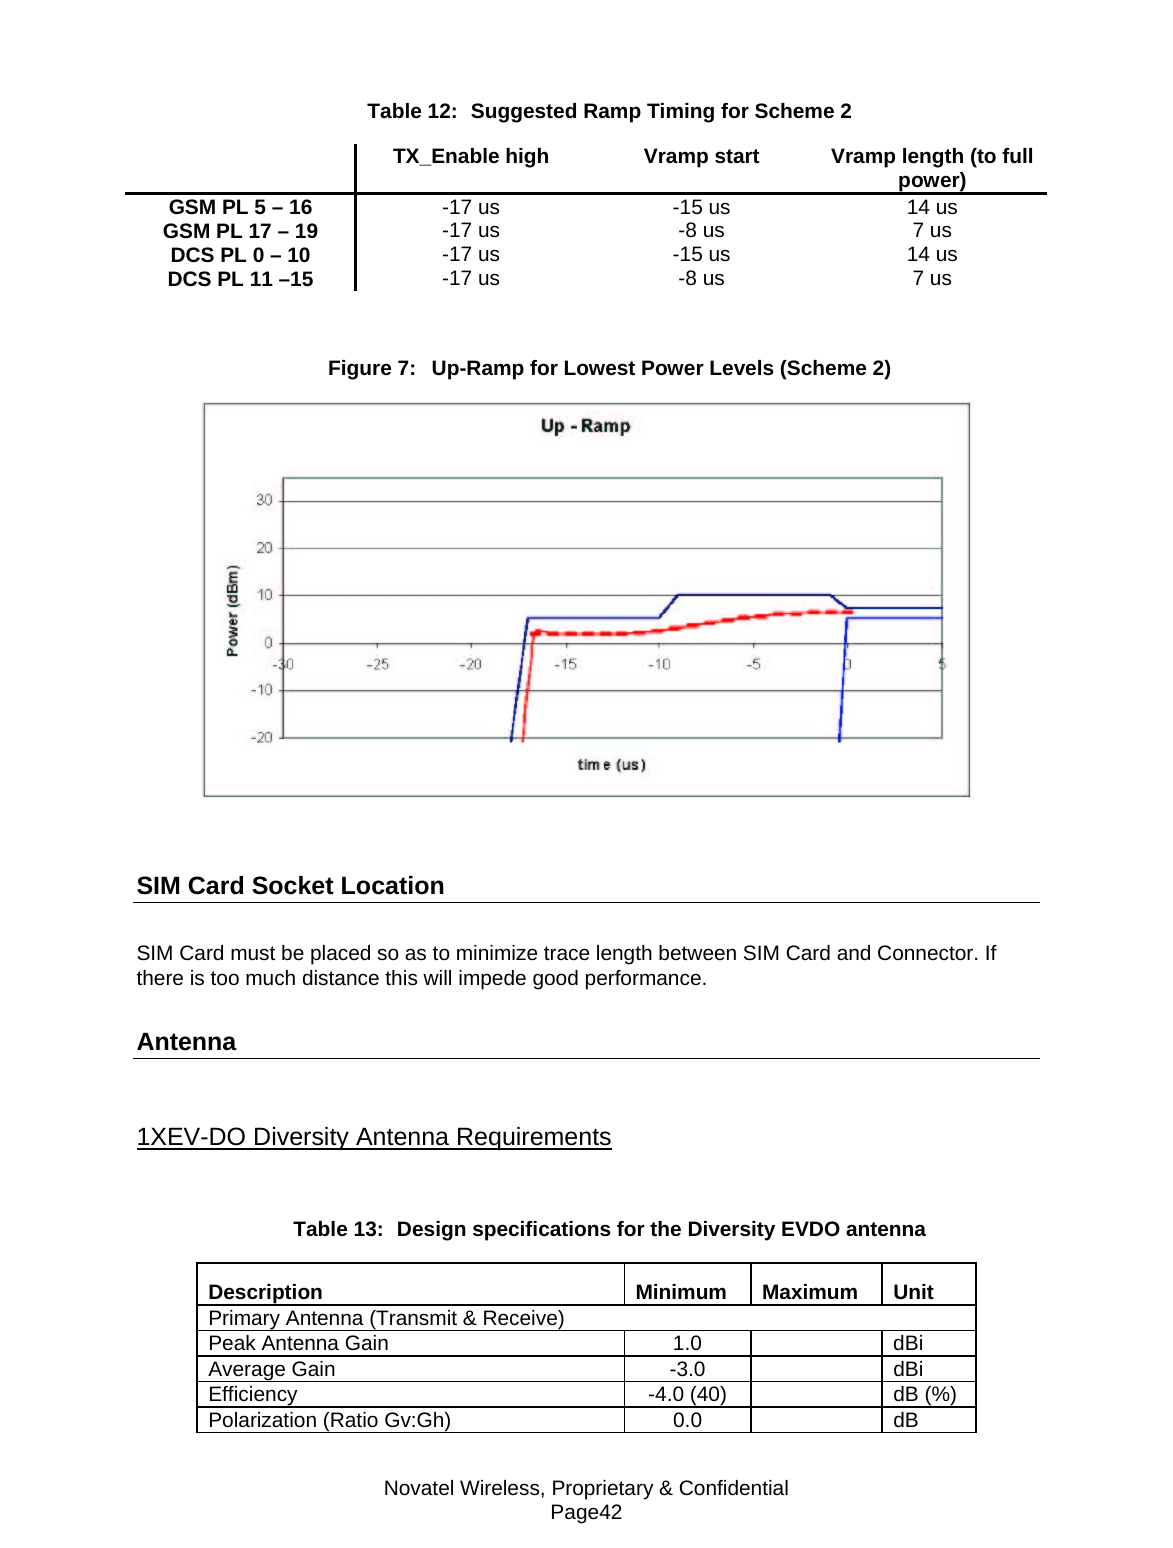 Novatel Wireless, Proprietary &amp; Confidential Page42 Table 12:  Suggested Ramp Timing for Scheme 2   TX_Enable high  Vramp start  Vramp length (to full power) GSM PL 5 – 16  -17 us  -15 us  14 us GSM PL 17 – 19  -17 us  -8 us  7 us DCS PL 0 – 10  -17 us  -15 us  14 us DCS PL 11 –15  -17 us  -8 us  7 us  Figure 7:  Up-Ramp for Lowest Power Levels (Scheme 2)    SIM Card Socket Location SIM Card must be placed so as to minimize trace length between SIM Card and Connector. If there is too much distance this will impede good performance. Antenna 1XEV-DO Diversity Antenna Requirements Table 13:  Design specifications for the Diversity EVDO antenna Description  Minimum Maximum Unit Primary Antenna (Transmit &amp; Receive) Peak Antenna Gain  1.0    dBi Average Gain  -3.0    dBi Efficiency  -4.0 (40)    dB (%) Polarization (Ratio Gv:Gh)  0.0    dB 